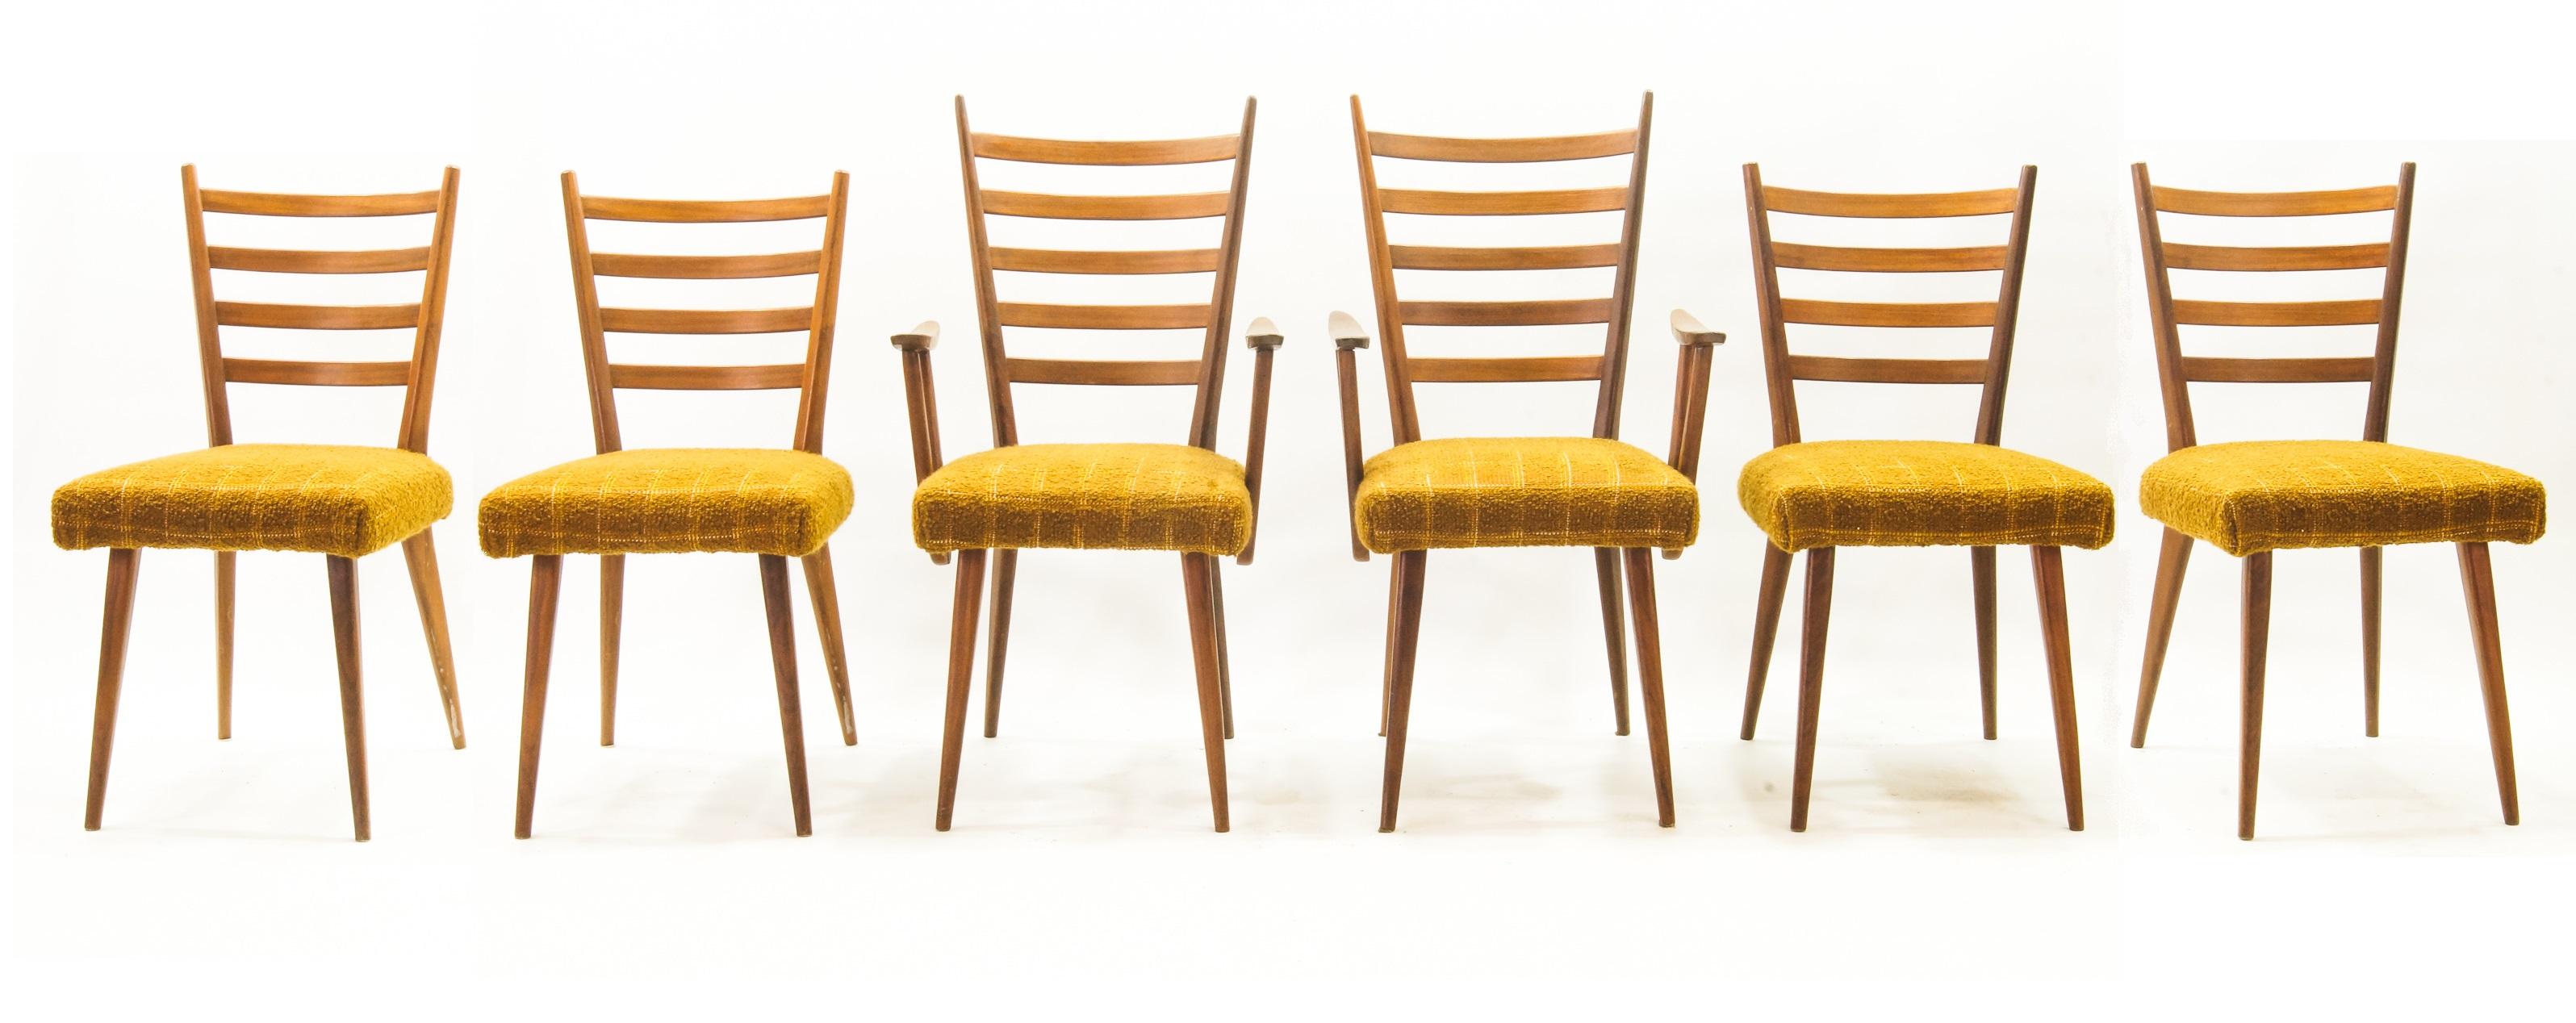 Mid-Century Modern Cees Braakman for Pastoe - Ladder Chairs, 1950's - Dinerset of 6